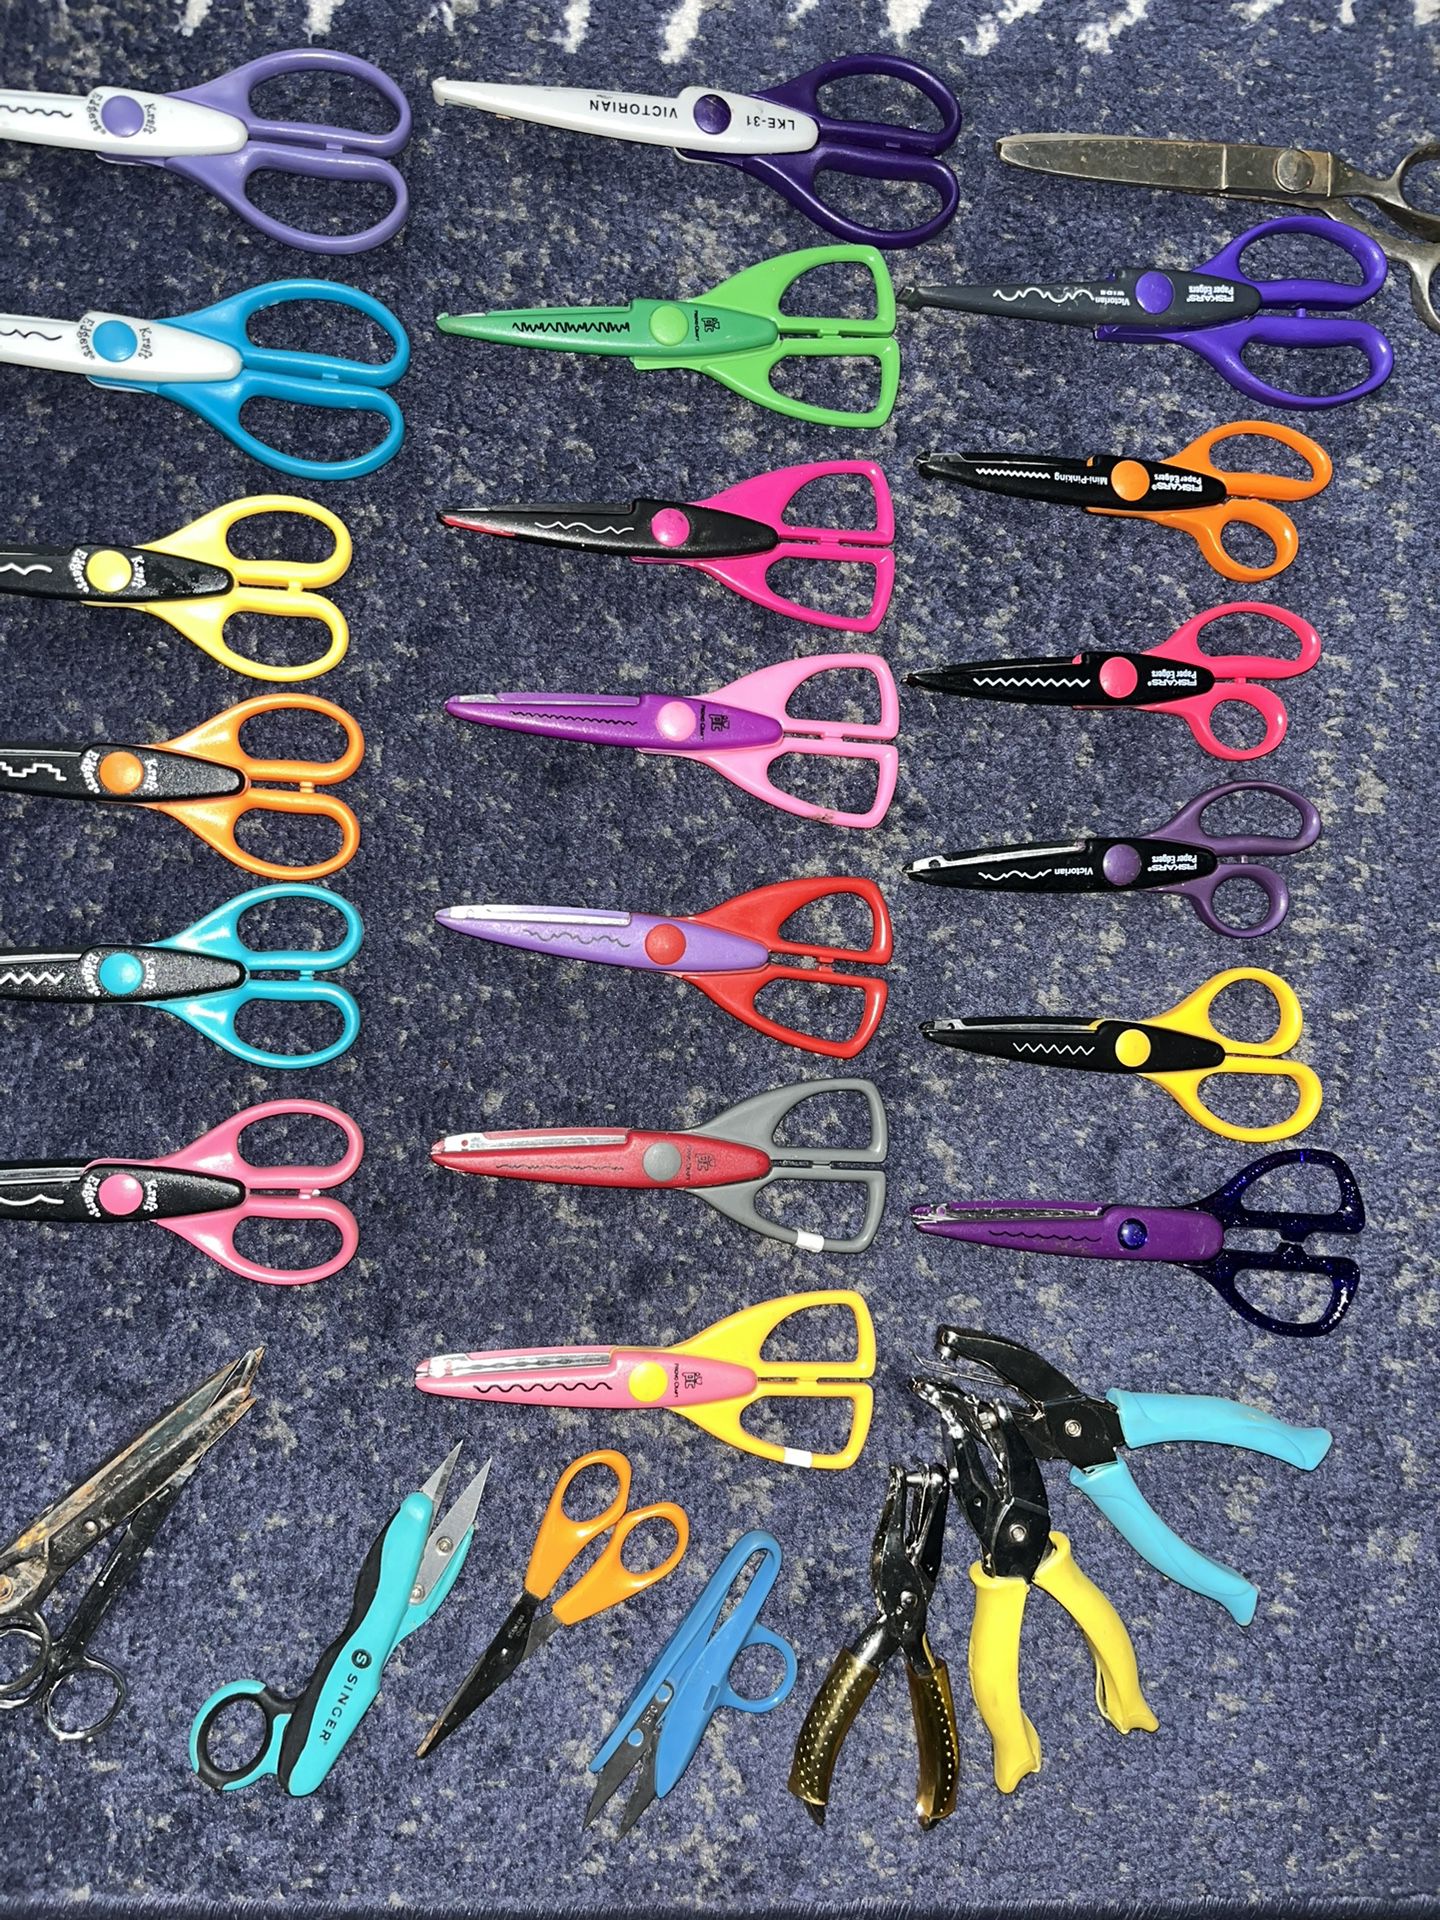 29 pc Crafting Cutters Combo - Pinking Shears 